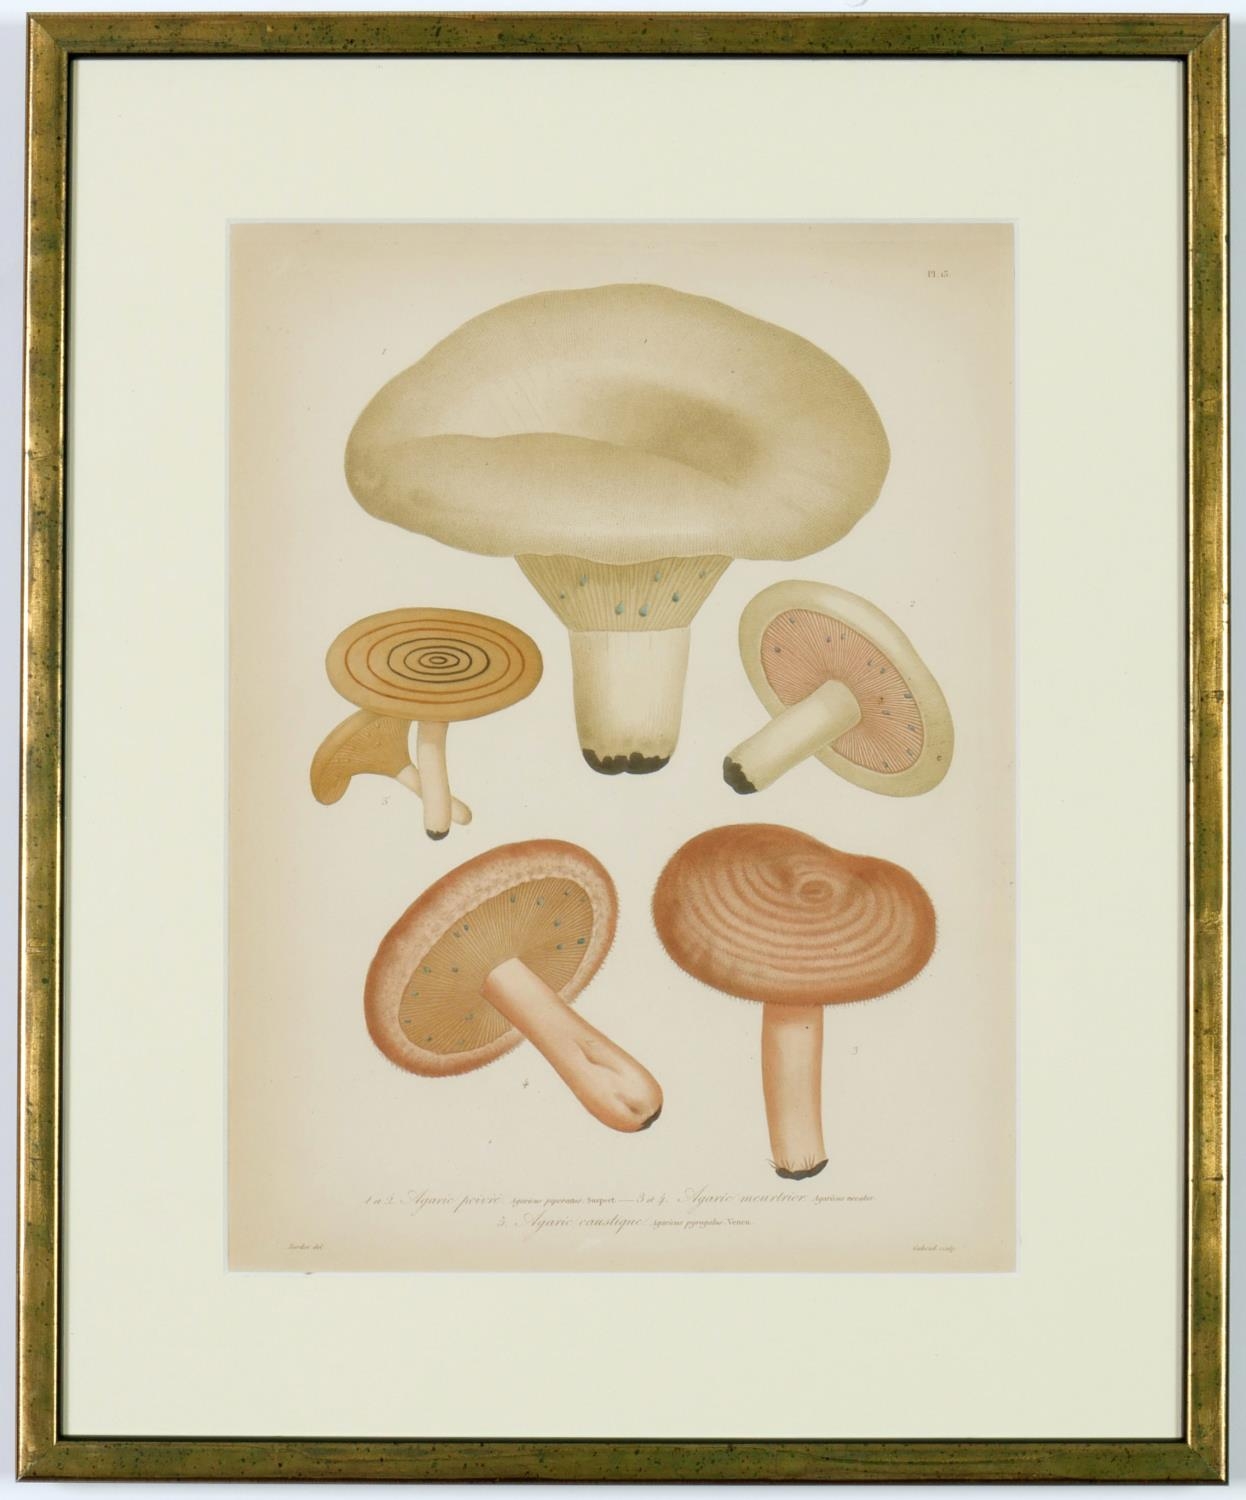 JOSEPH ROQUES, Mushrooms, a set of nine rare engravings with hand colouring, 1864, Victor Masson - Image 7 of 10